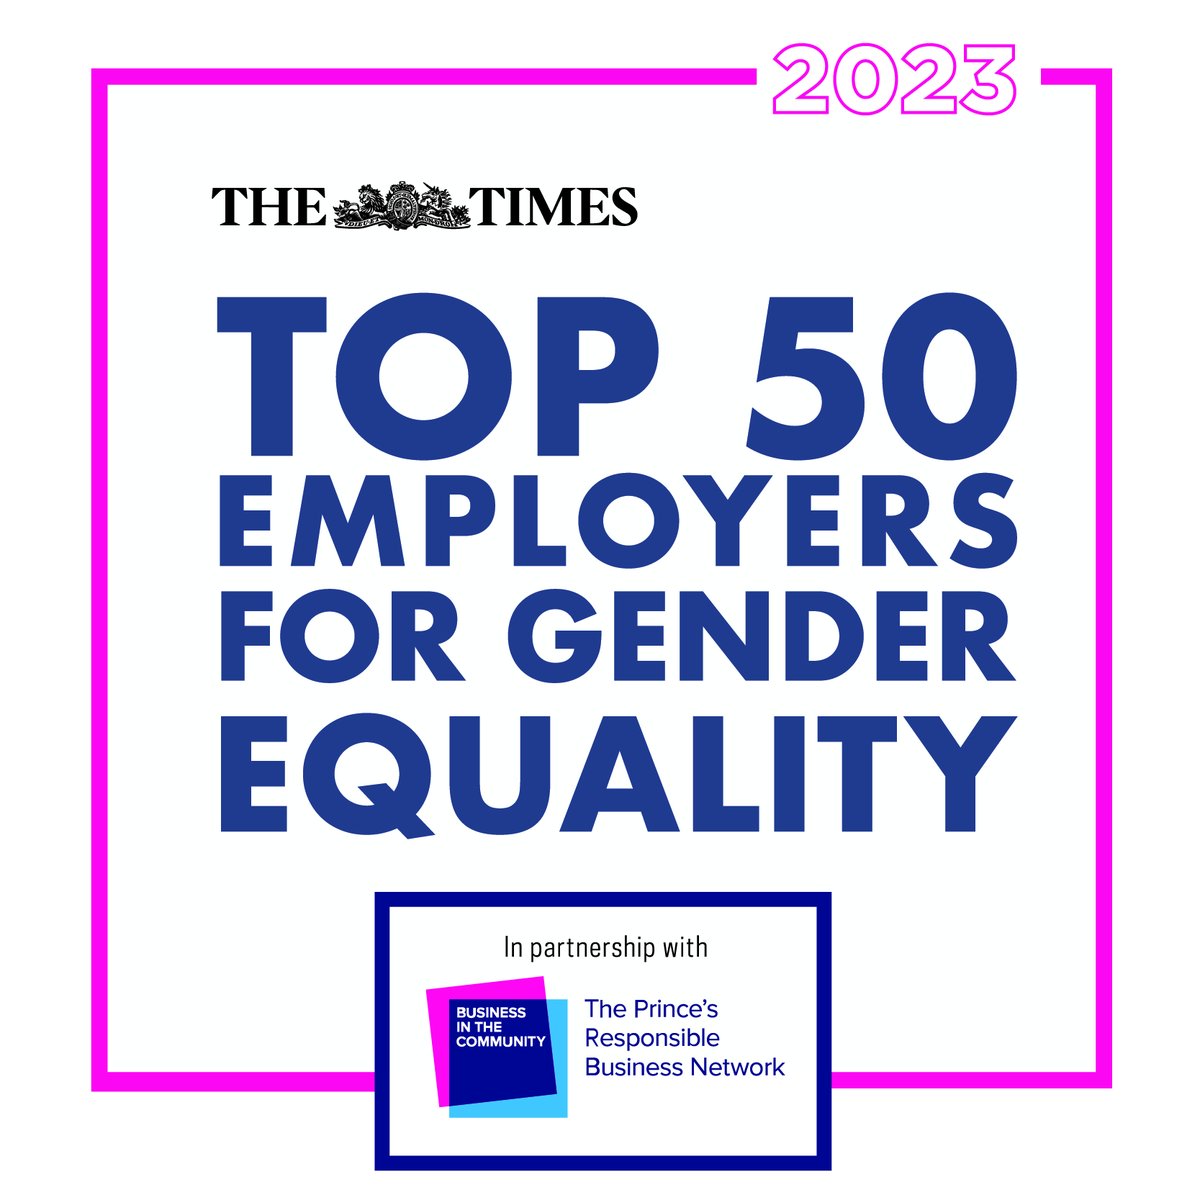 We're proud to be a #TimesTop50 employer for #GenderEquality. Addressing gender equality at work is crucial & this list compiled by @BITC recognises employers who are making real progress: